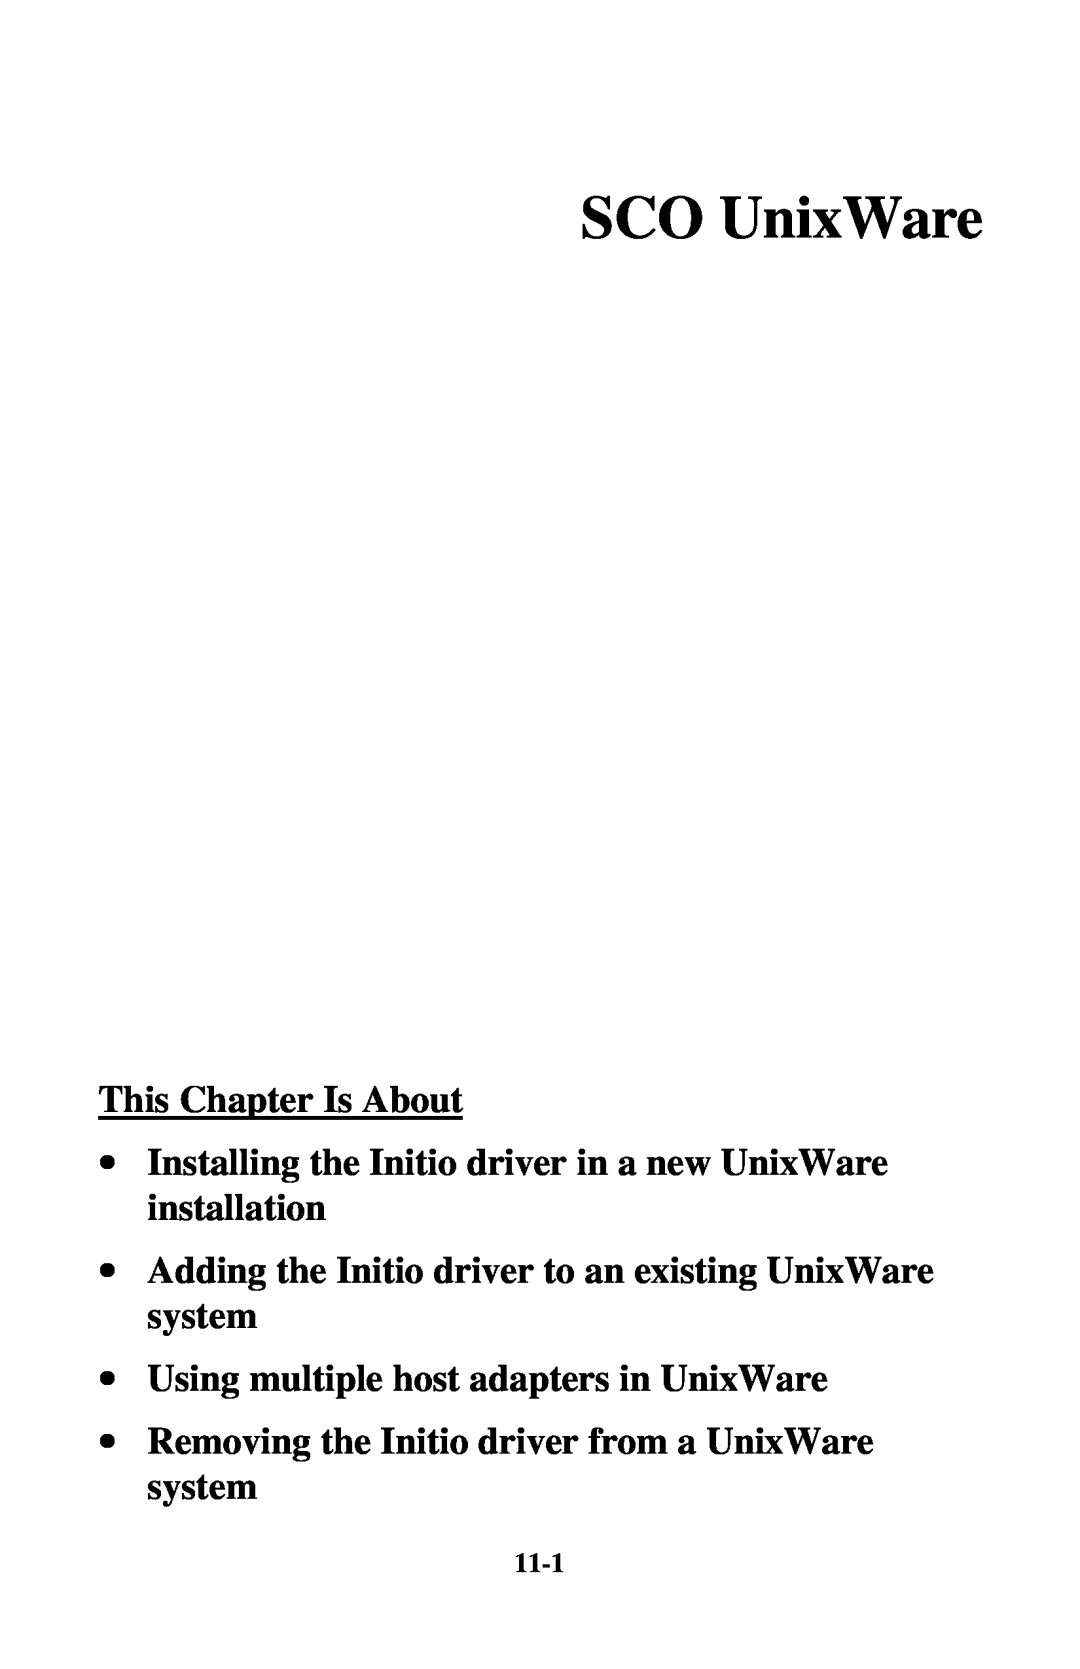 Initio INI-9100U SCO UnixWare, ∙ Installing the Initio driver in a new UnixWare installation, This Chapter Is About, 11-1 